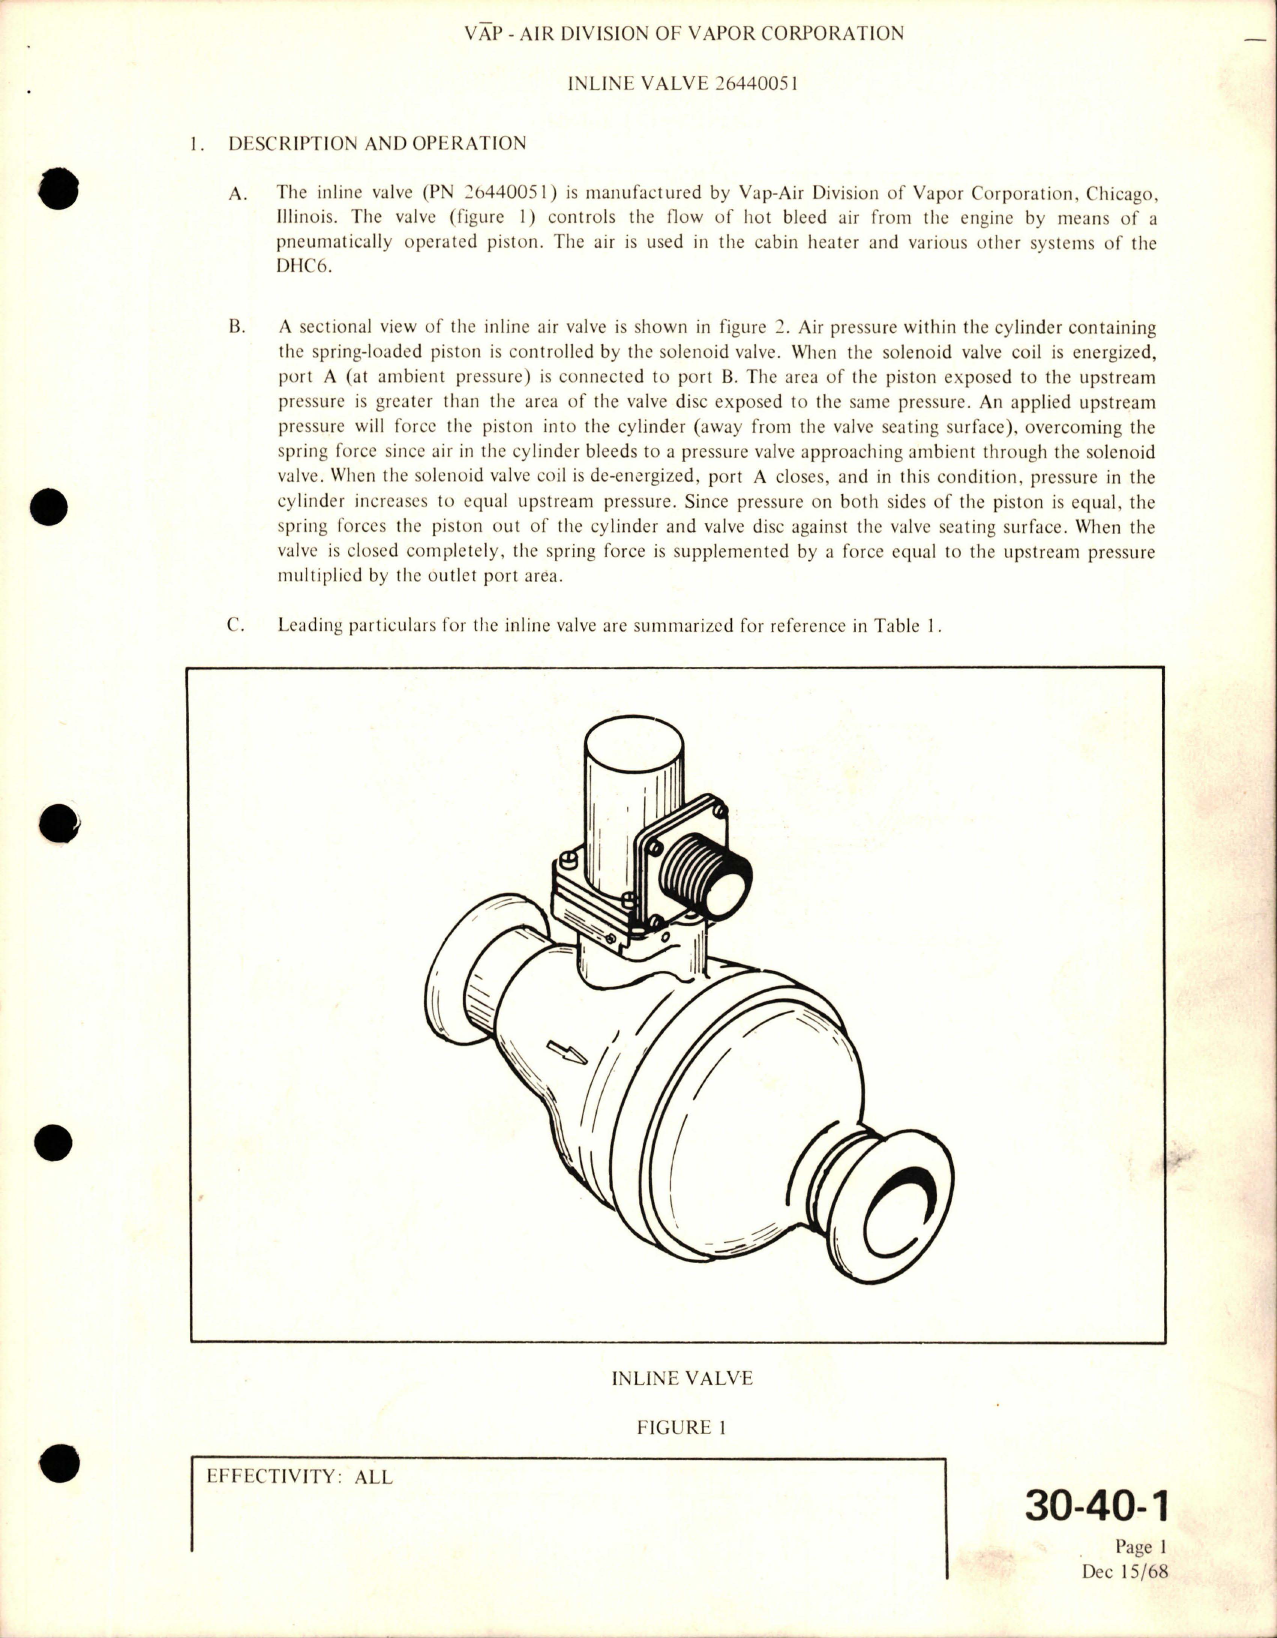 Sample page 5 from AirCorps Library document: Overhaul Instructions with Illustrated Parts Breakdown for Inline Valve - Part 26440051